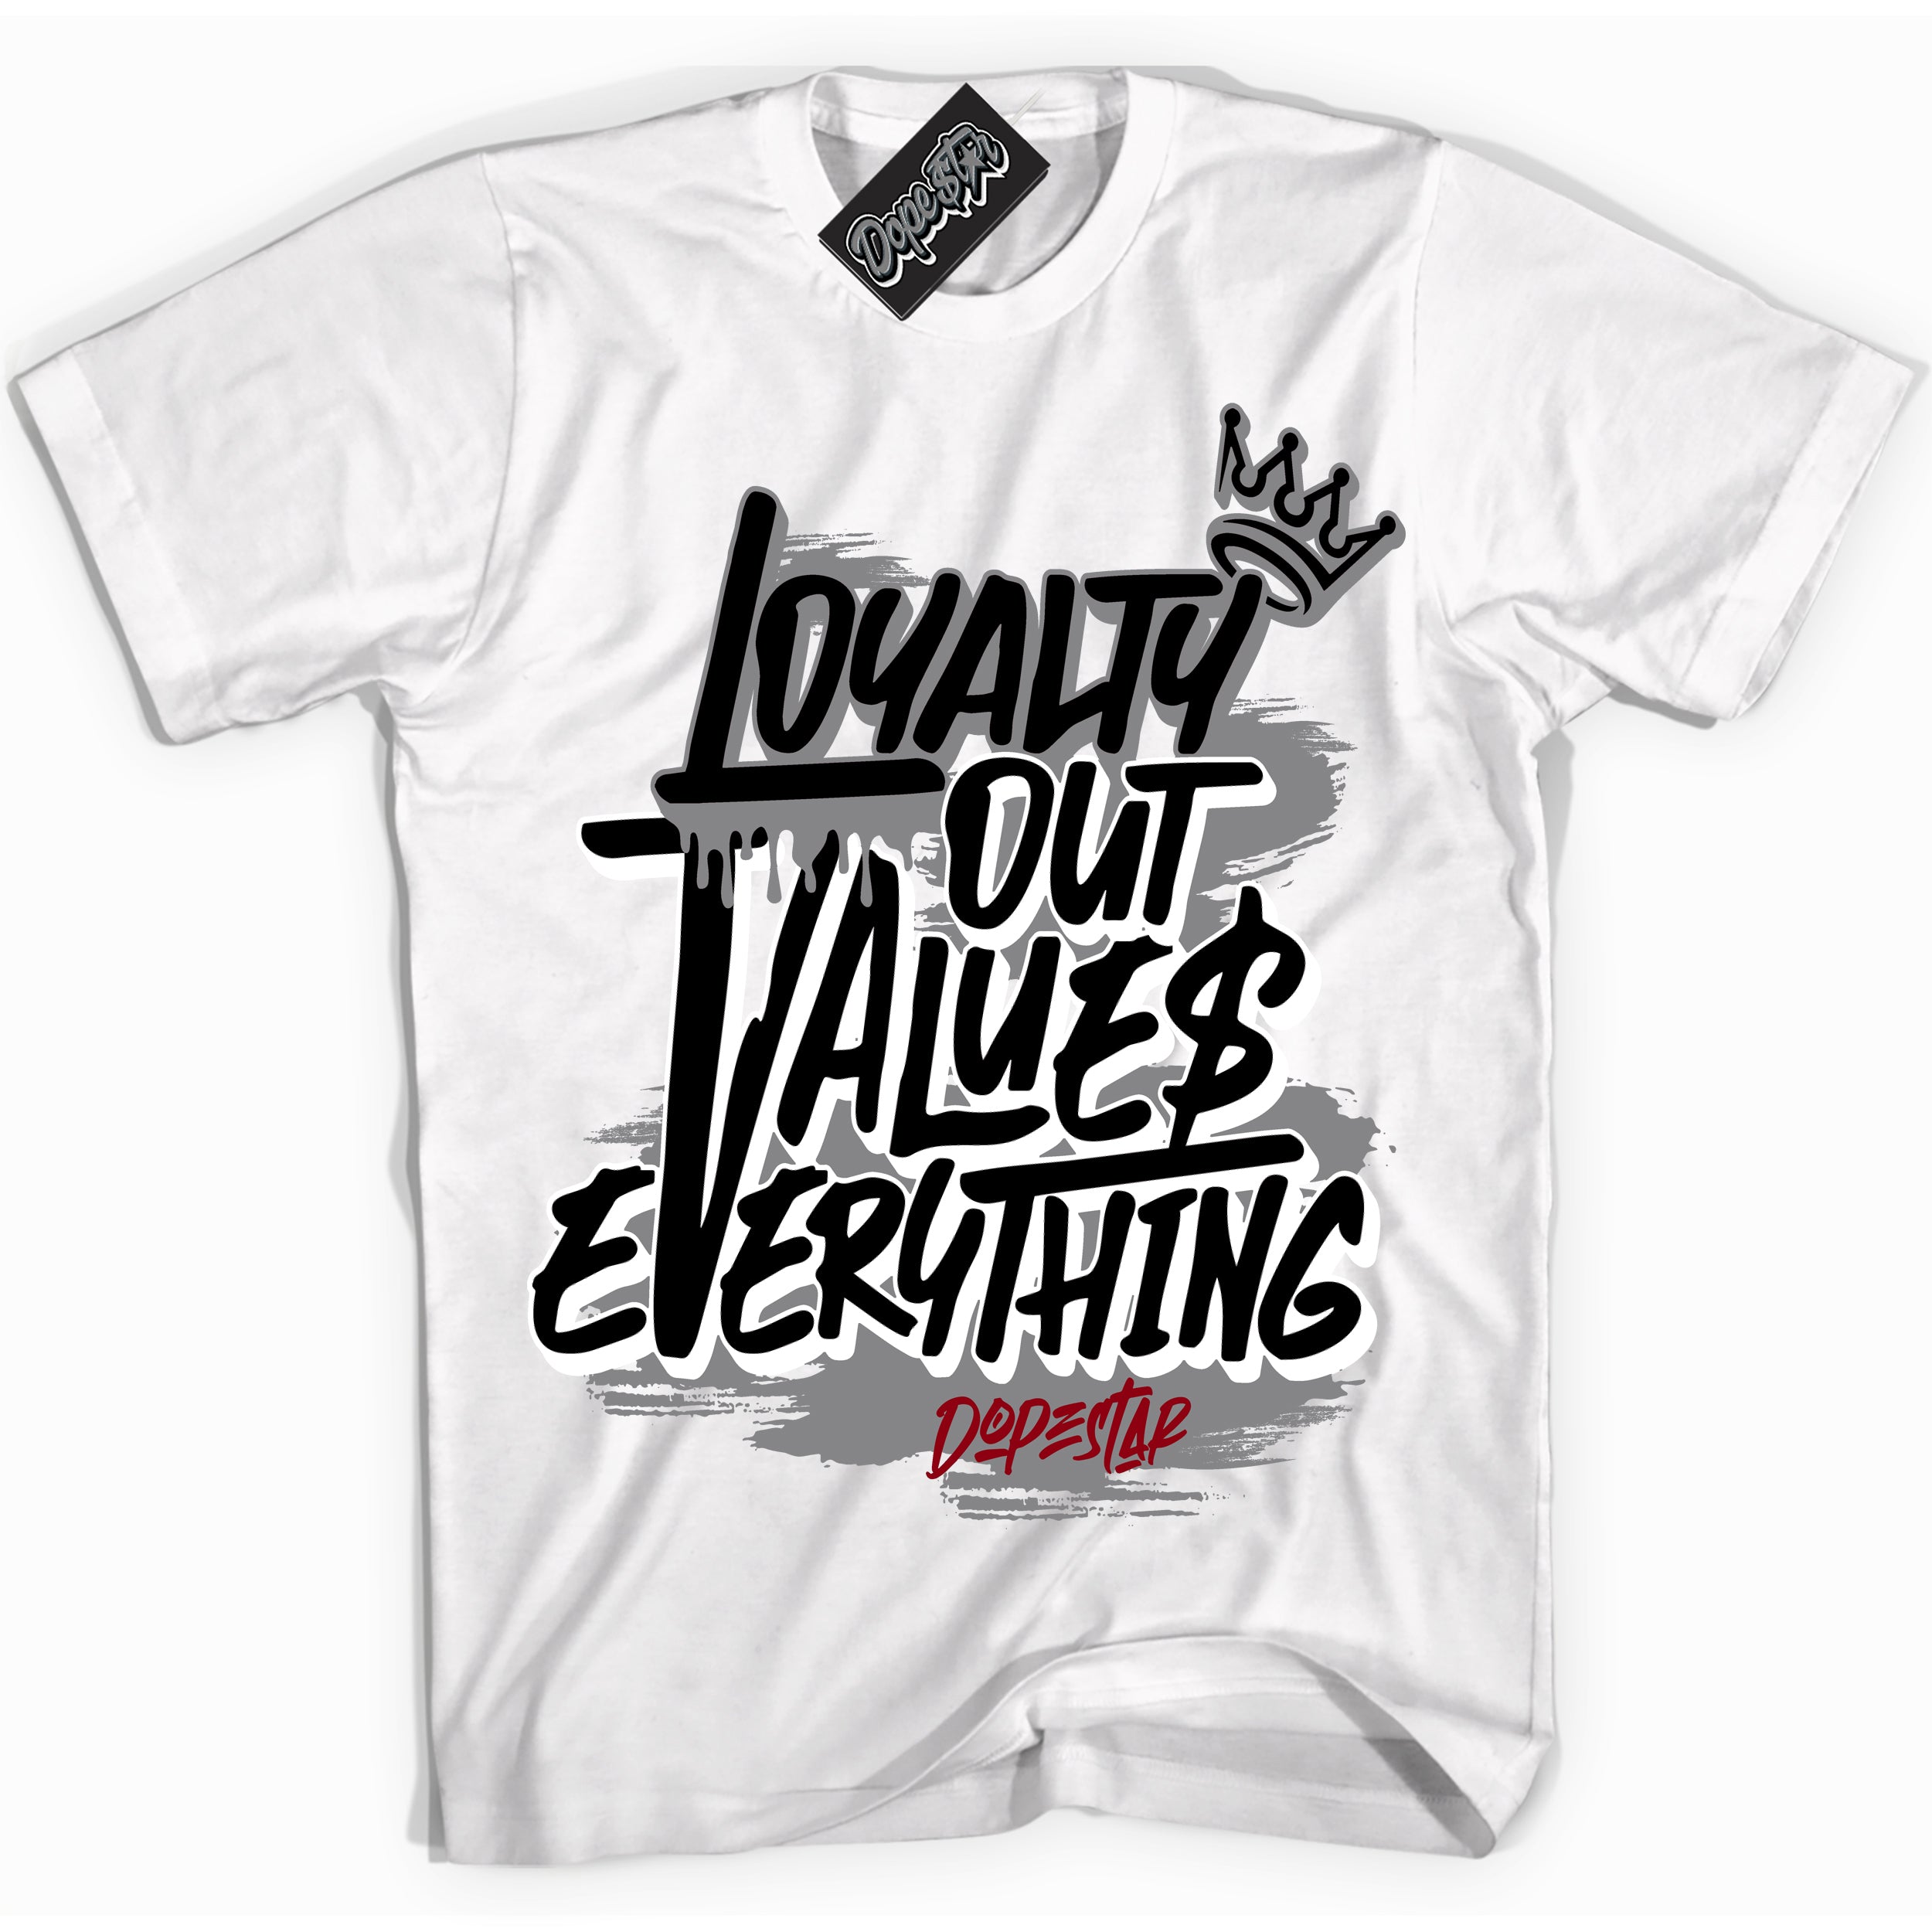 Cool White Shirt with “ Loyalty Out Values Everything” design that perfectly matches Particle Grey 9s Sneakers.